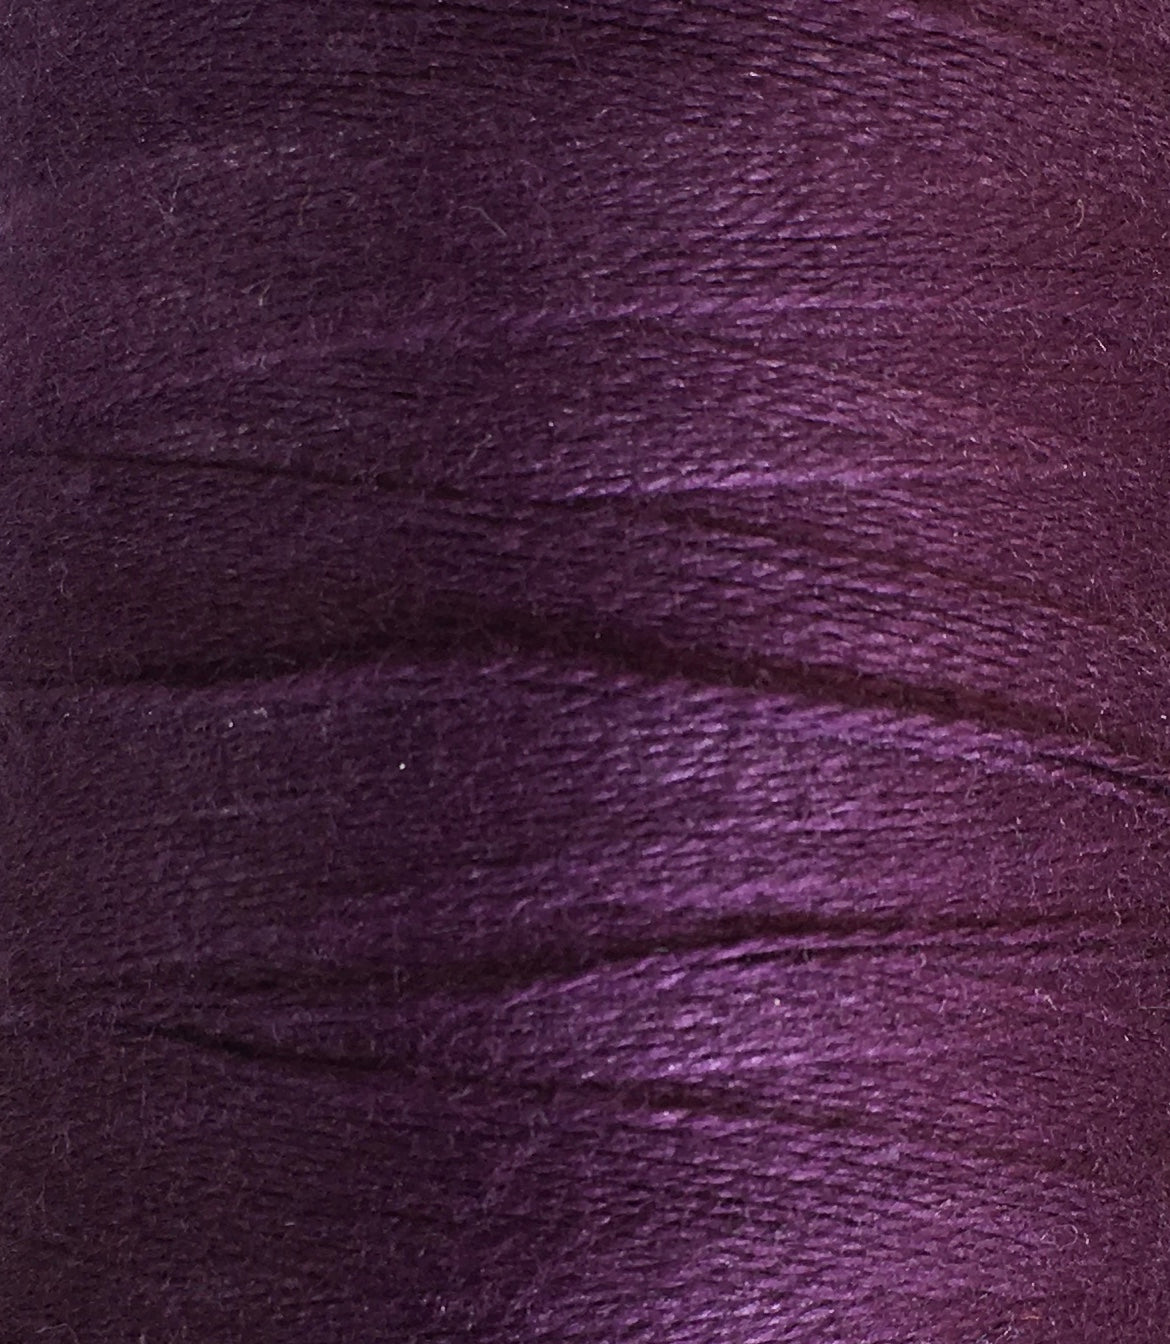 The best 8/2 cotton weaving yarn we know of is perfect for woven towels and much more.